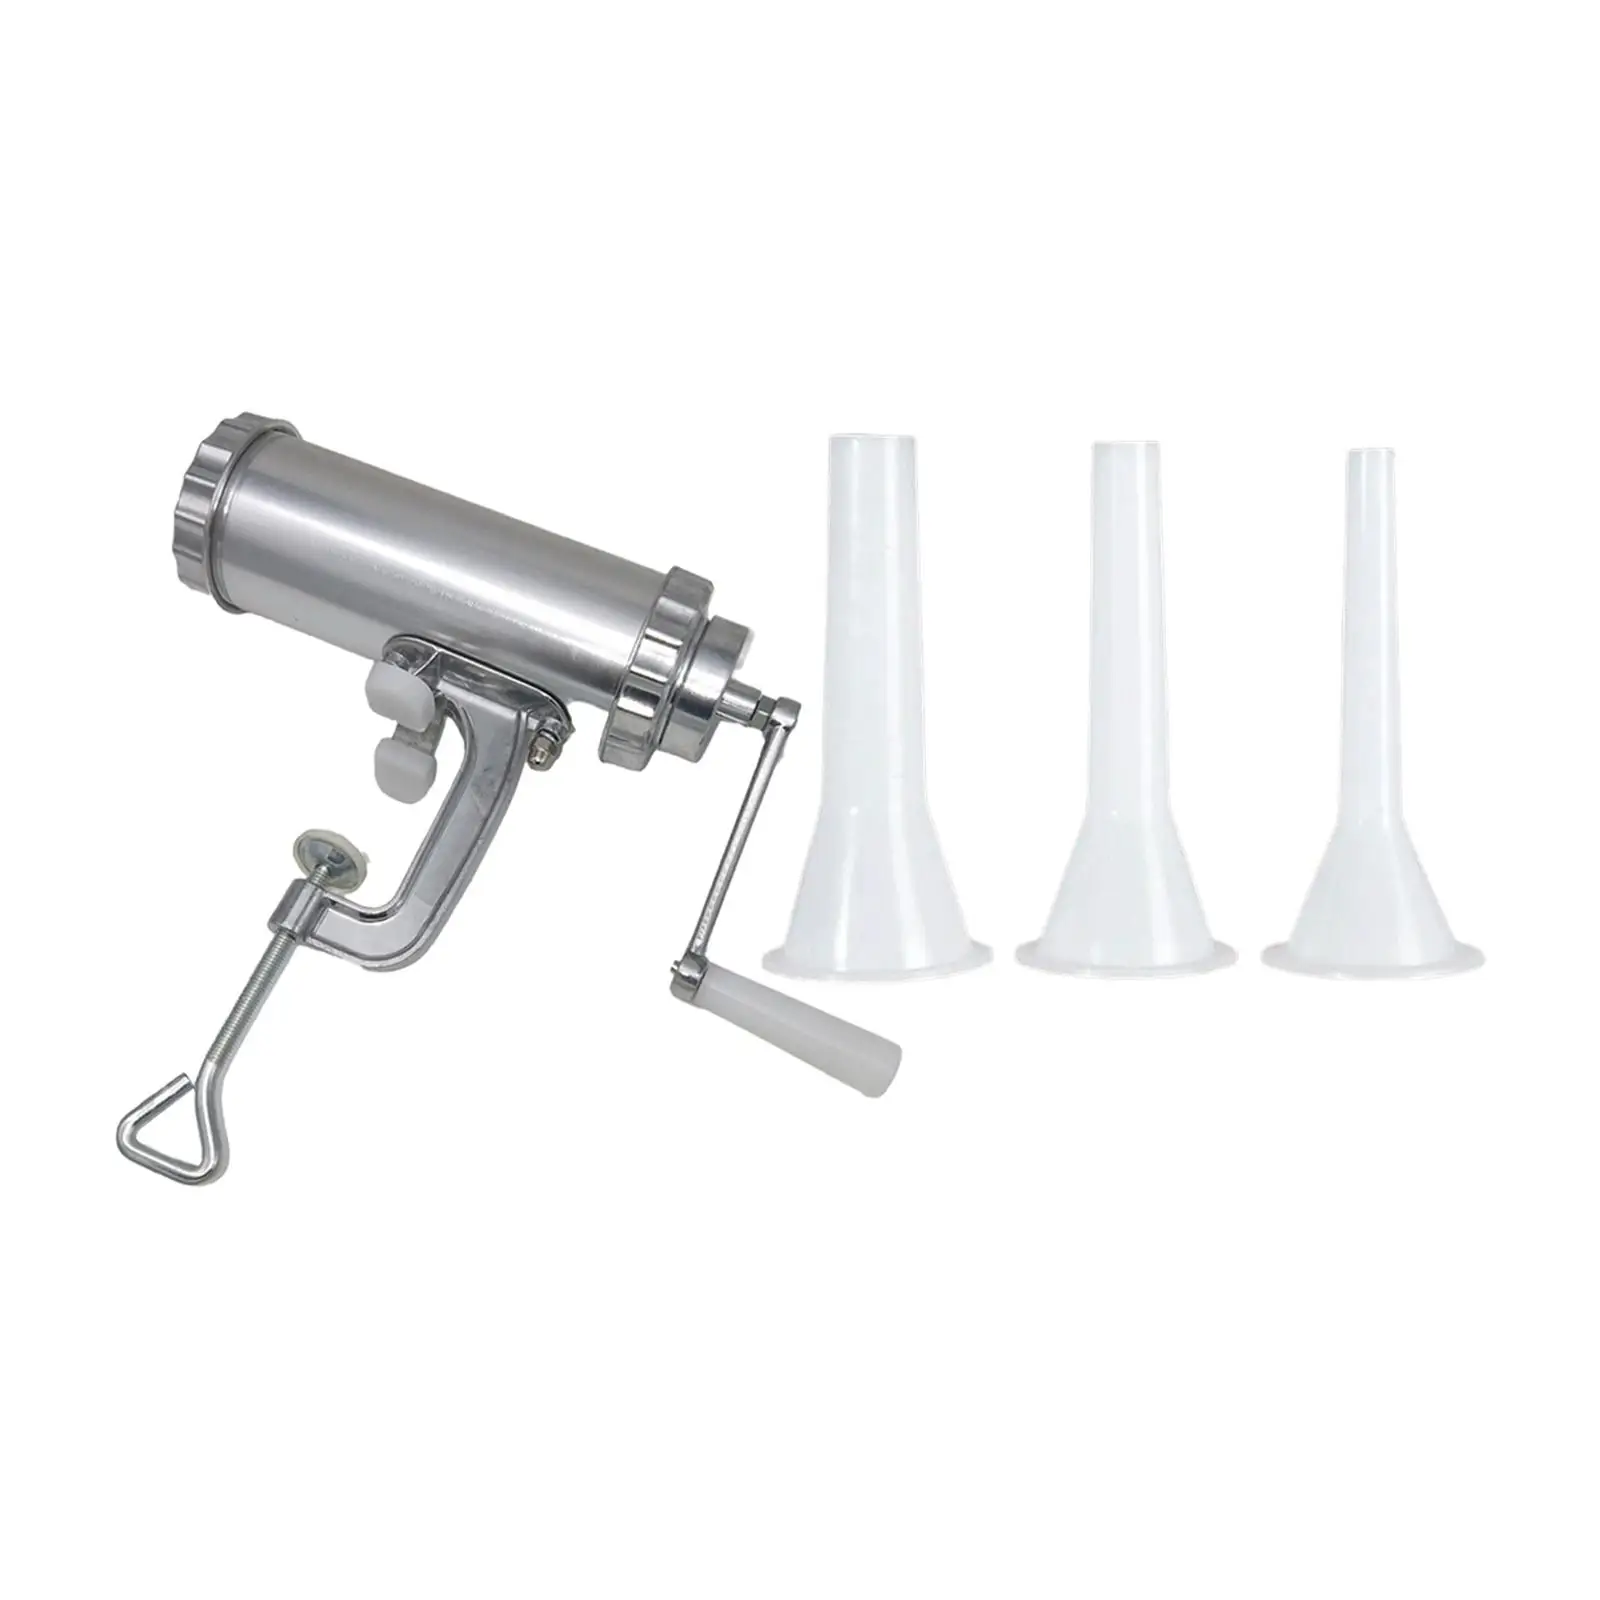 Manual Sausage Stuffer Meat Grinder Aluminum Kitchen Meat Filling with 3 Filling Nozzles for Meat Hot Dogs Beef Bratwurst Chilli